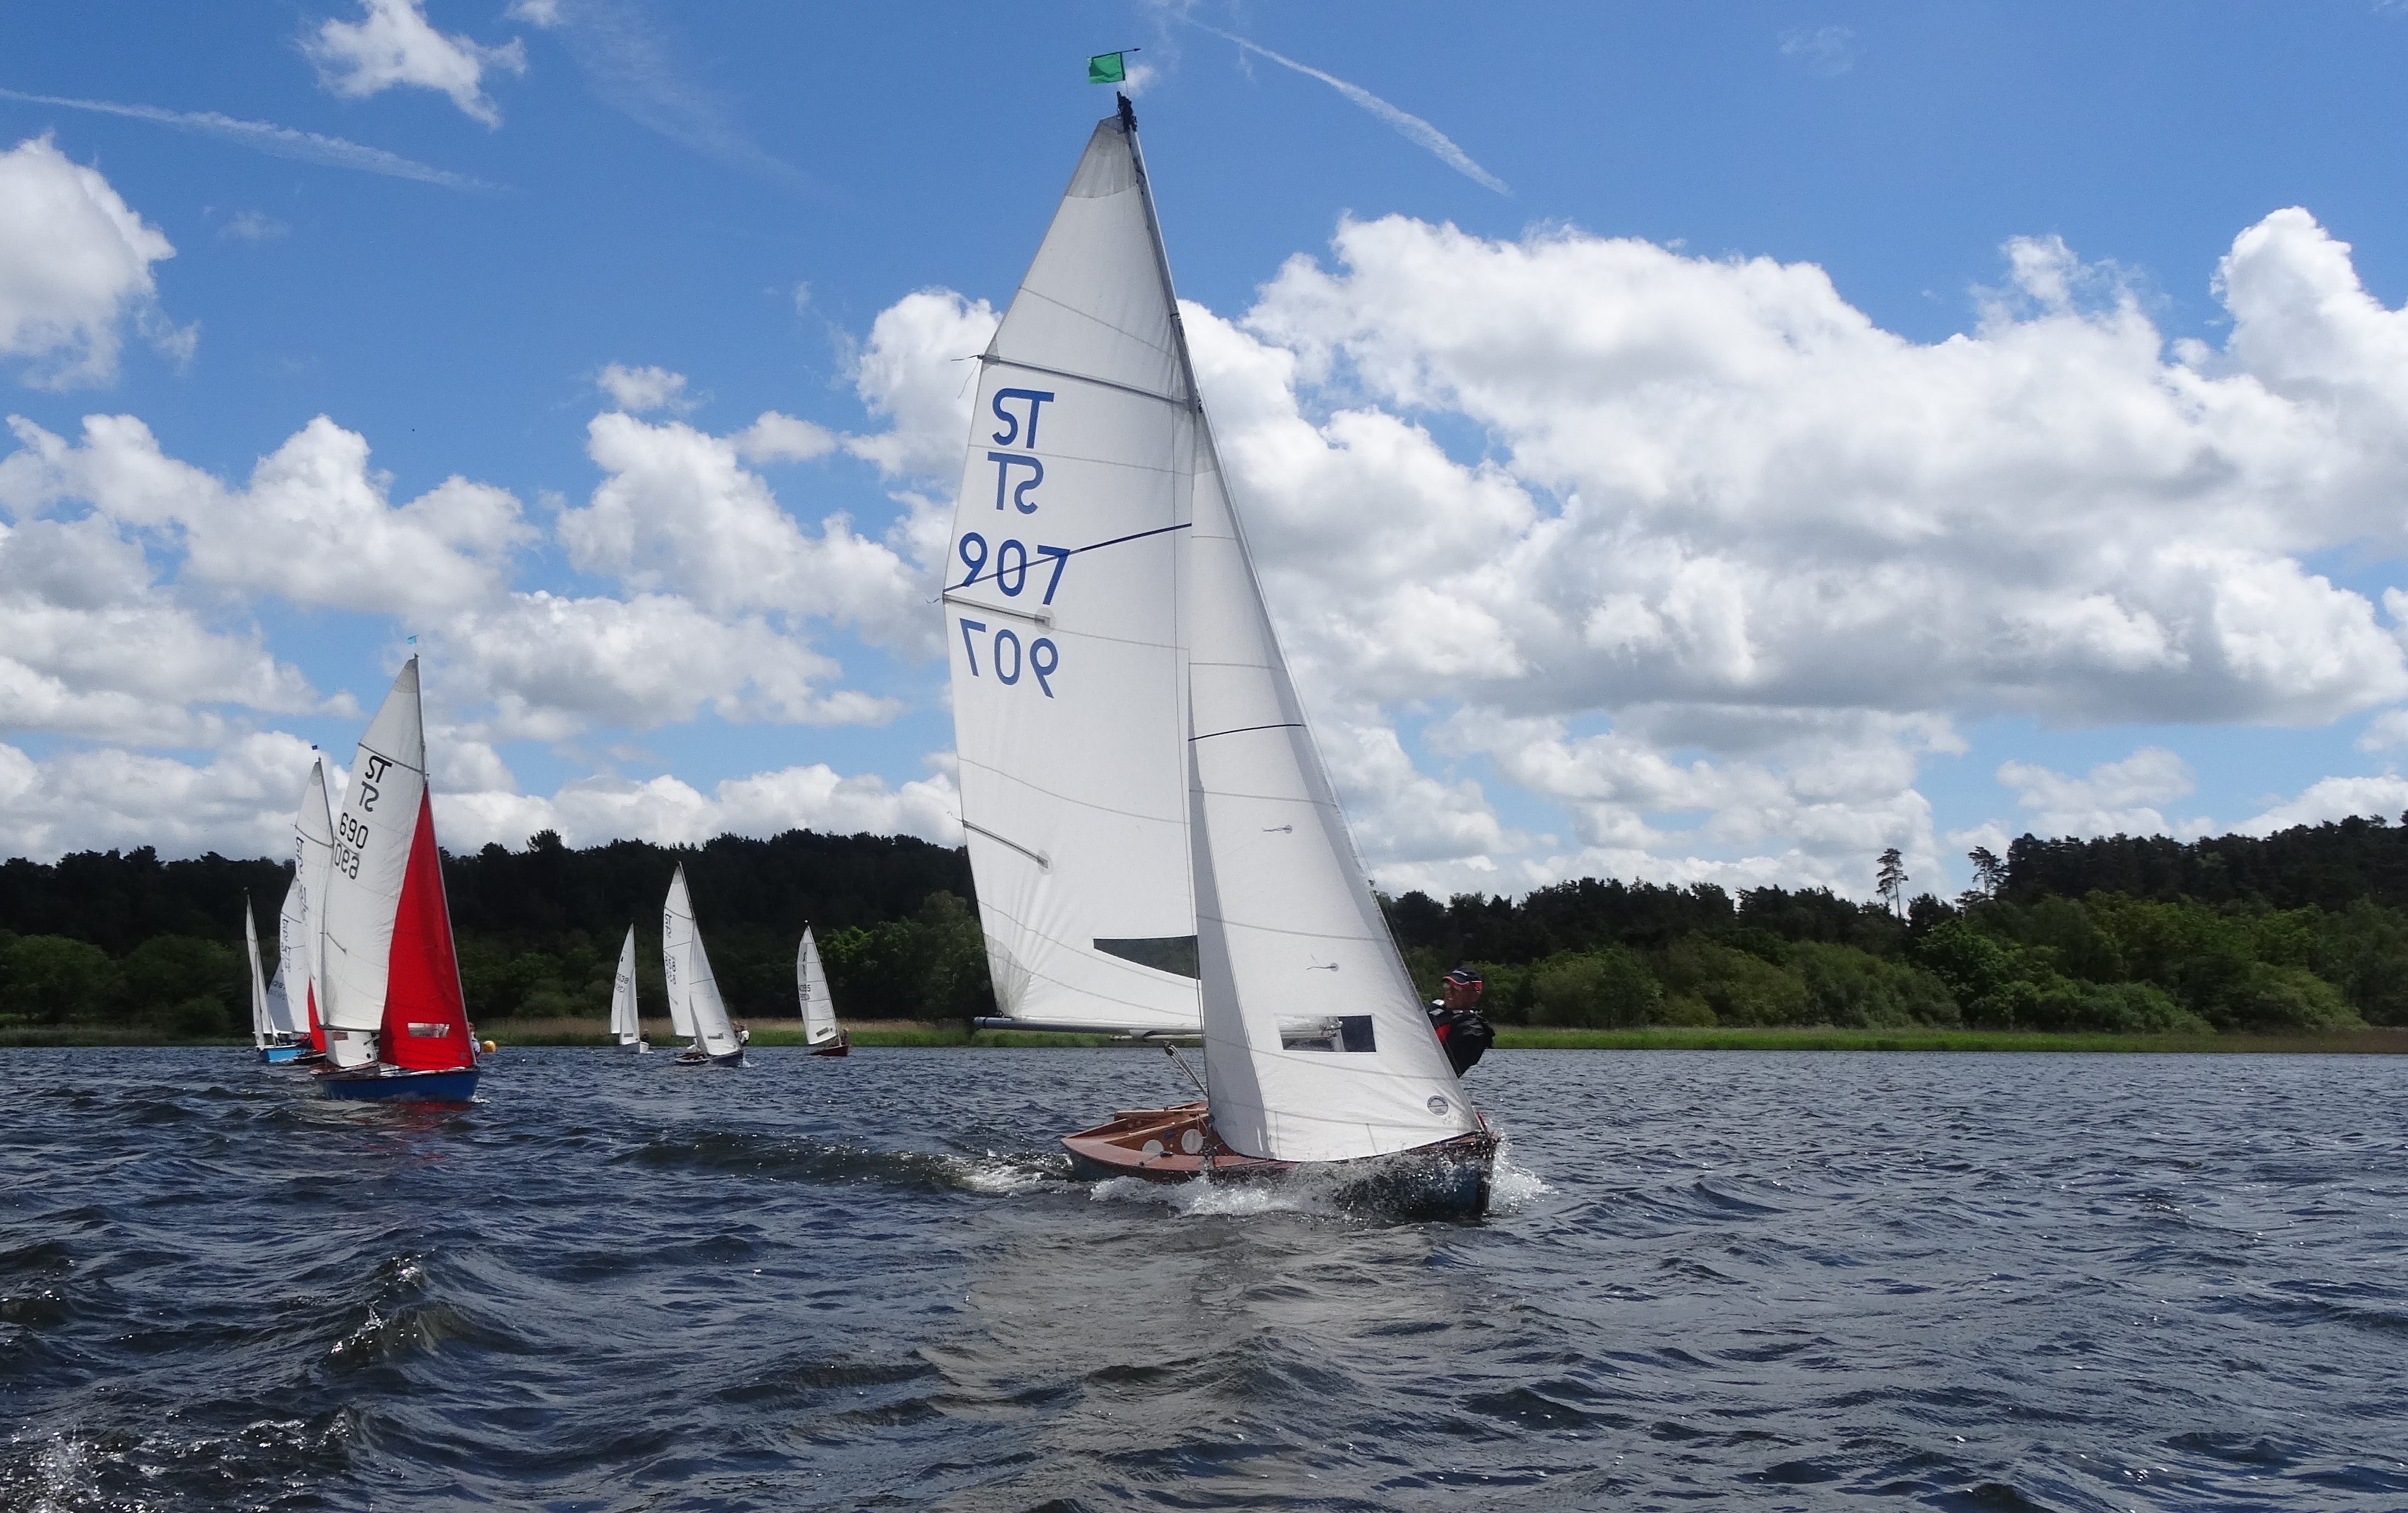 SigneT during exciting racing at Frensham Pond SigneT Open Meeting